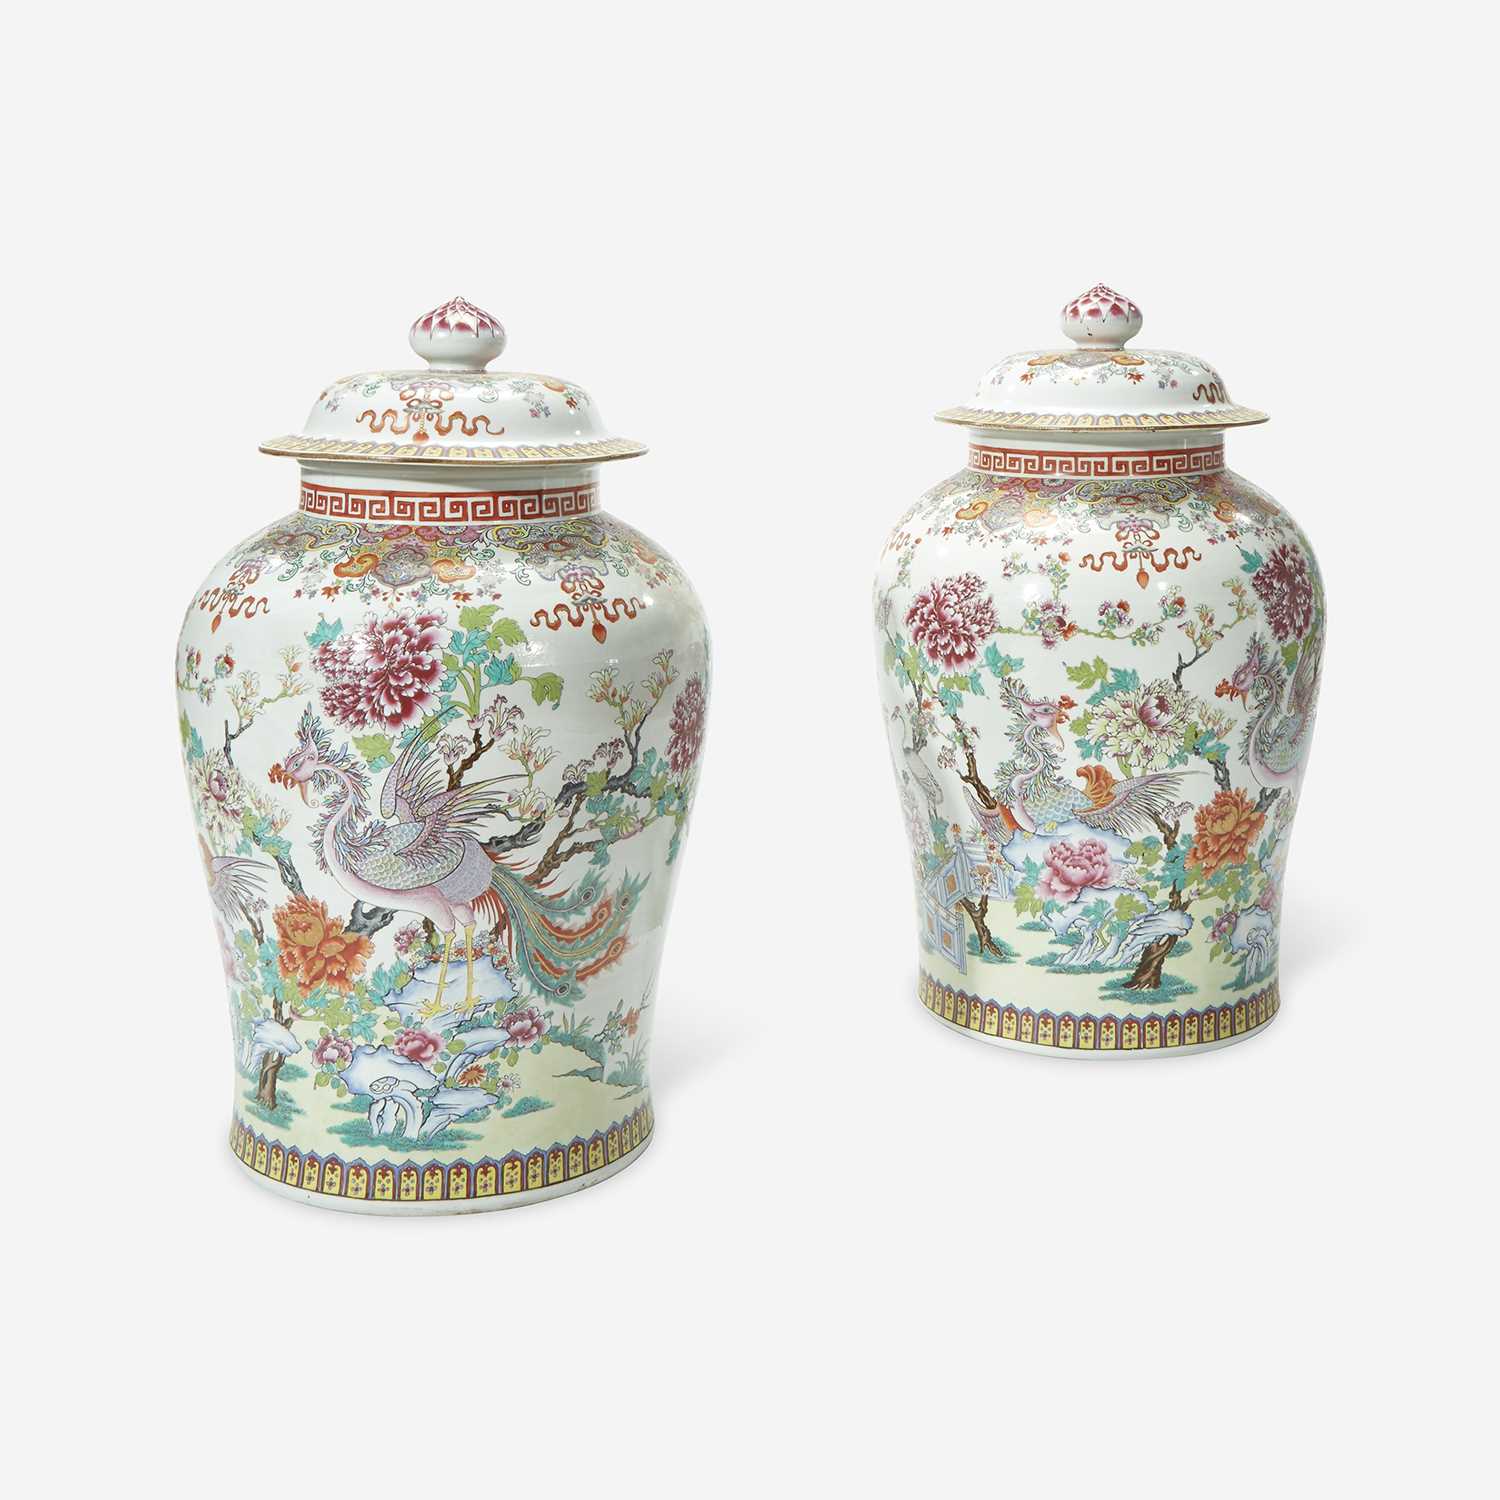 Lot 50 - A Large Pair of Samson Chinese Export Style Famille Rose Covered Urns